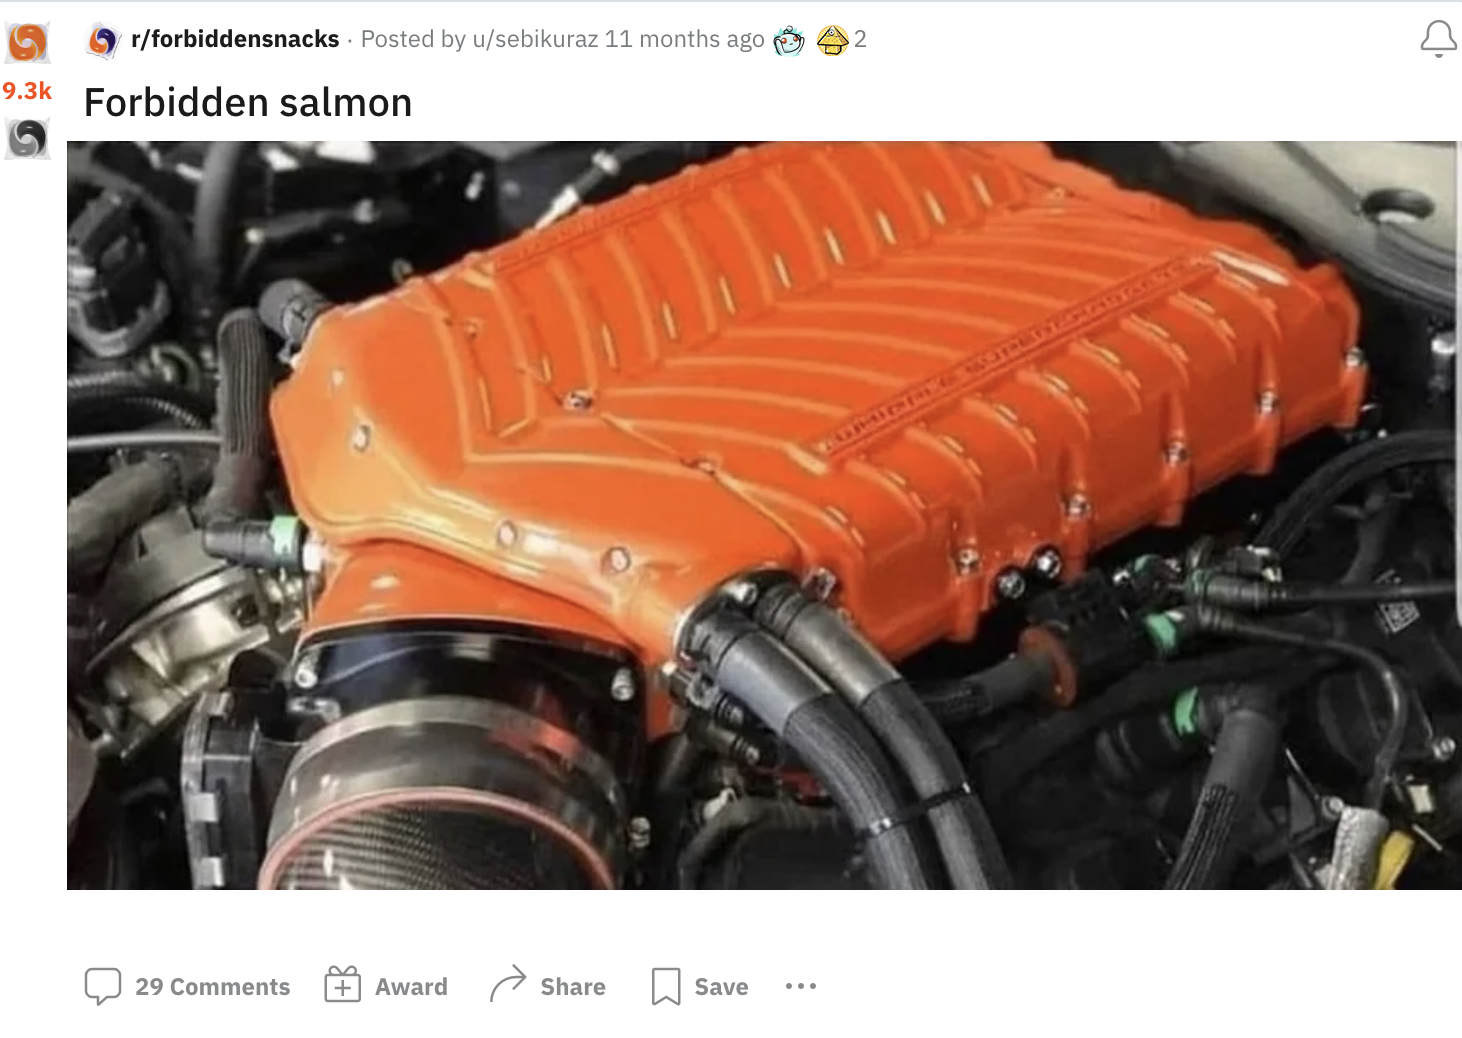 under car hood with blower that resembles salmon